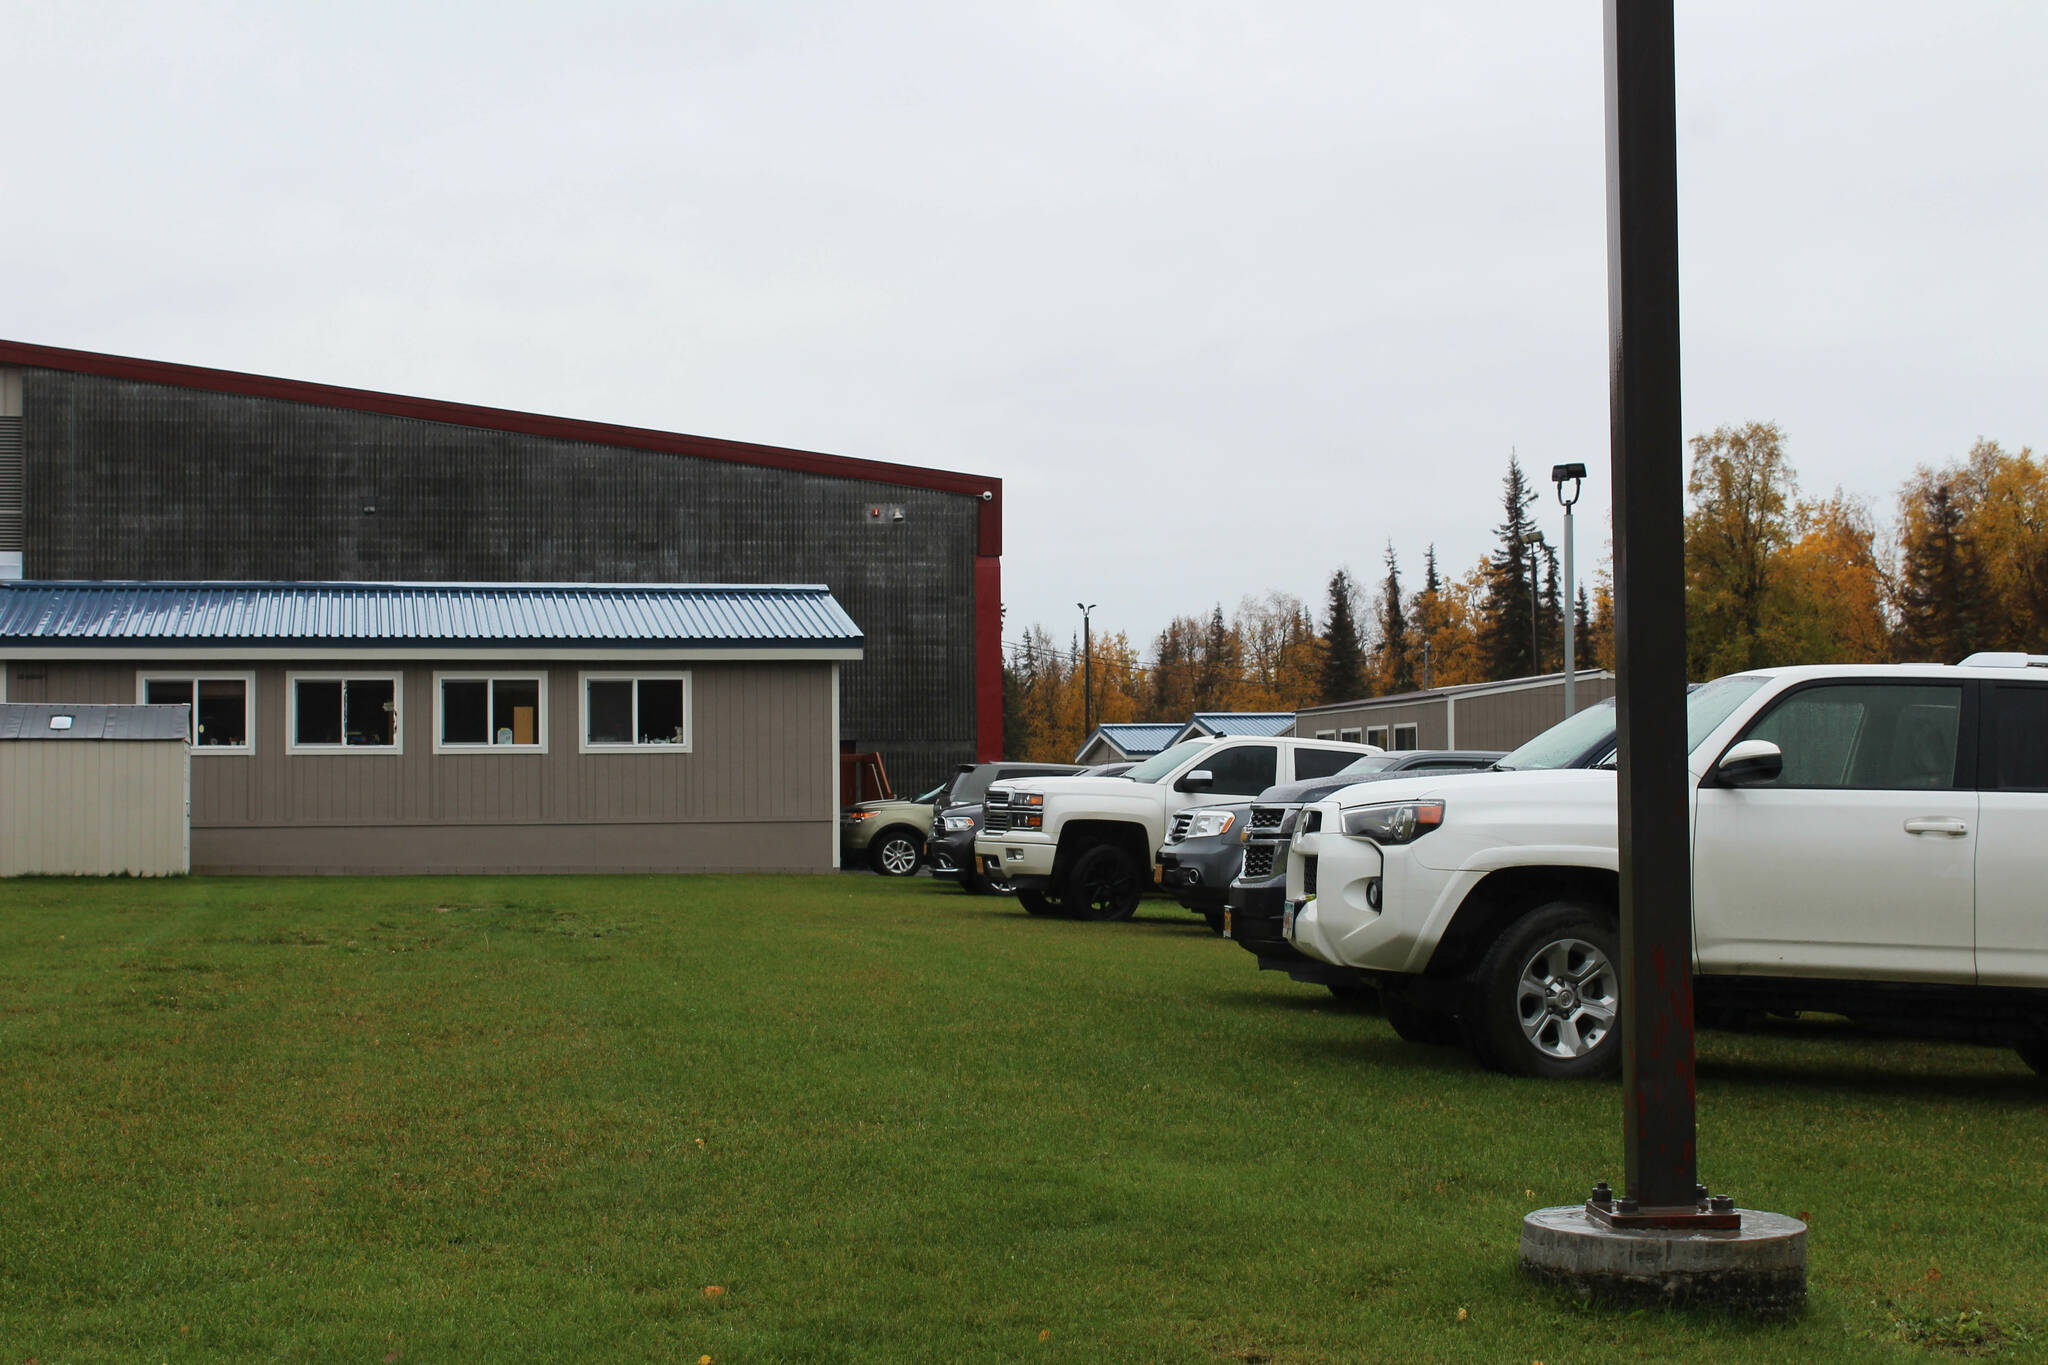 Staff vehicles are parked on the grass behind Mountain View Elementary School on Thursday, Sept. 29, 2022 in Kenai, Alaska. A bond package up for consideration by Kenai Peninsula Borough voters on Oct. 4 would fund improvements to the school’s traffic flow. (Ashlyn O’Hara/Peninsula Clarion)